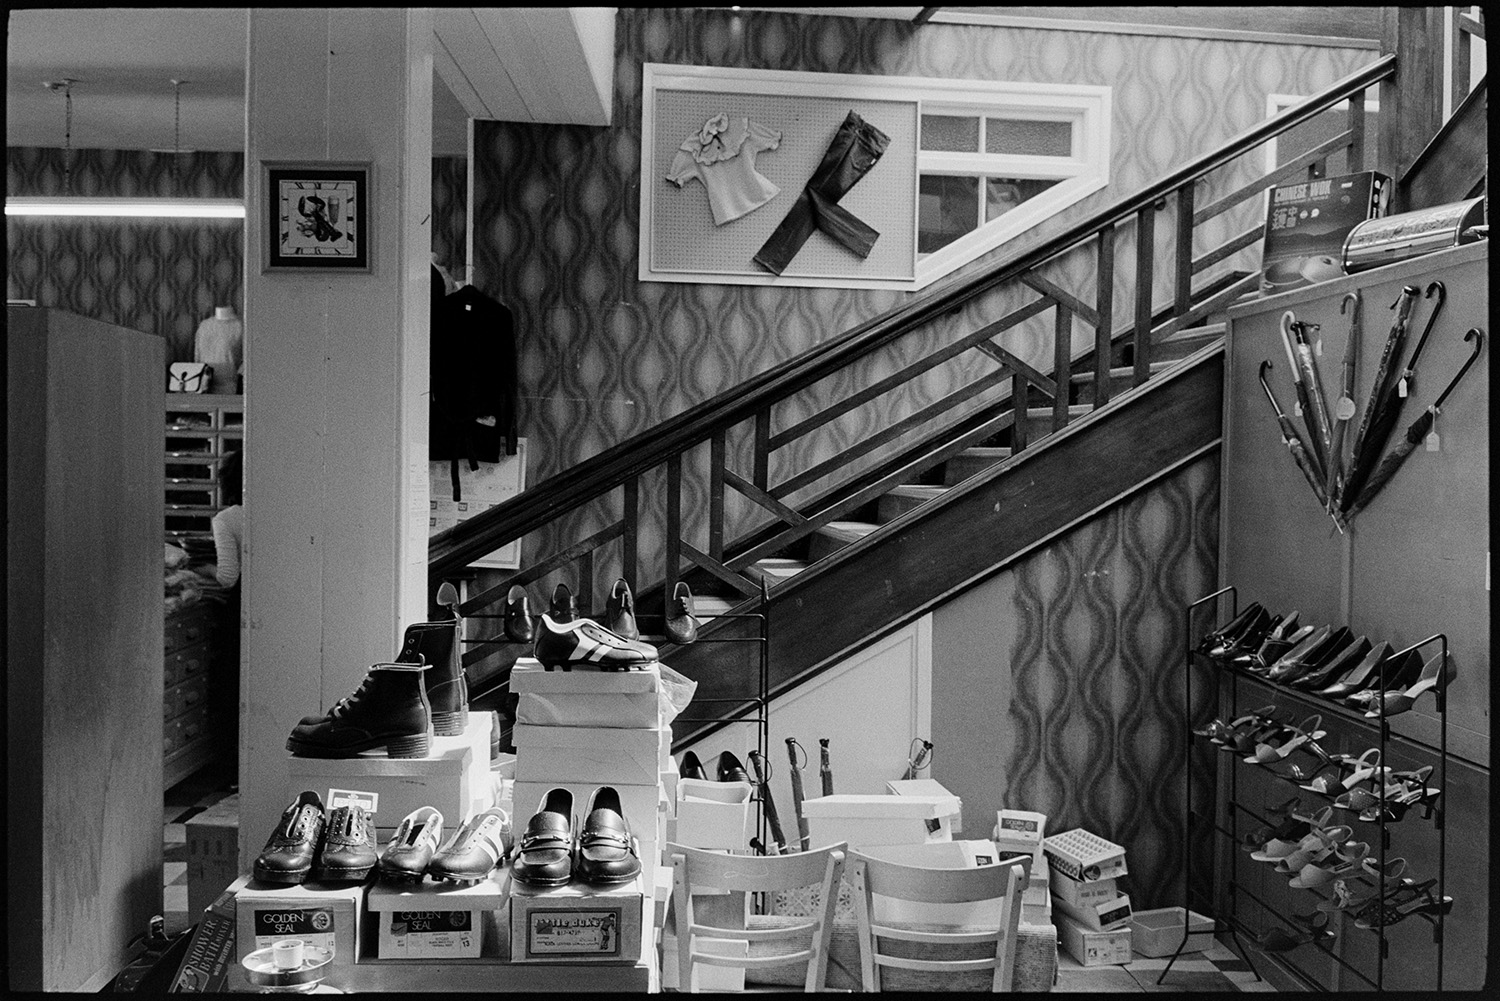 Interior of clothes shop shelves and displays of goods. Woman doing accounts, staircase. 
[A display of shoes and umbrellas below a staircase in a shop in Buttgarden Street, Bideford. The wall behind the staircase is covered with patterned wallpaper and a display of a pair of trousers and a top.]